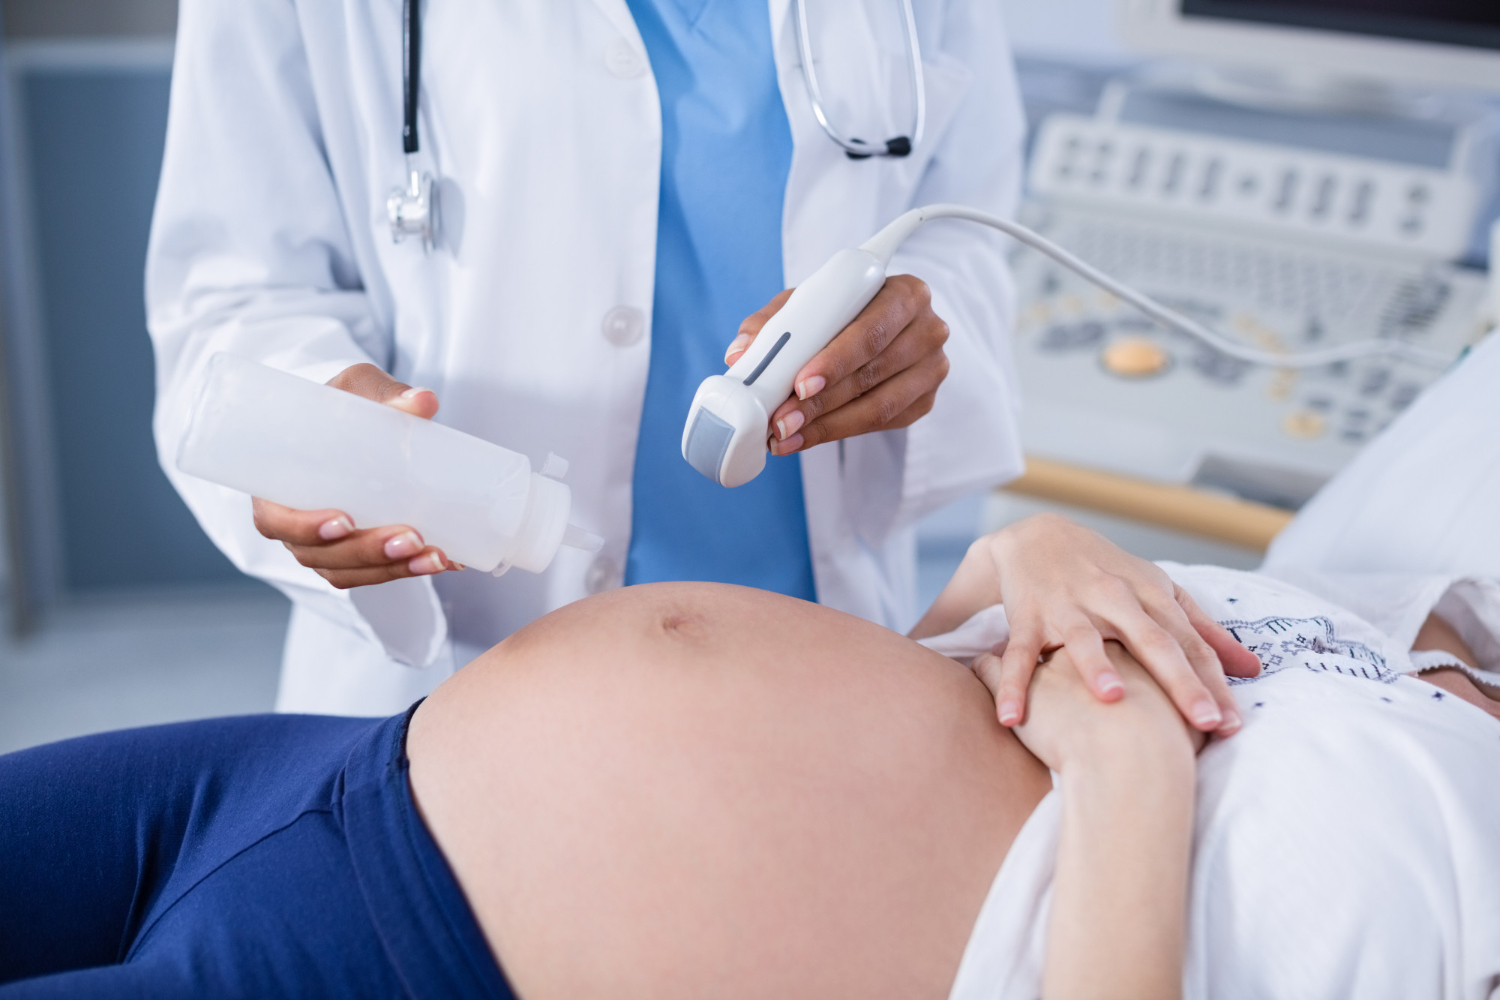 The best Gynecologist and obstetrician specialist doctor provide the wonderful obstetrics treatment to the patients